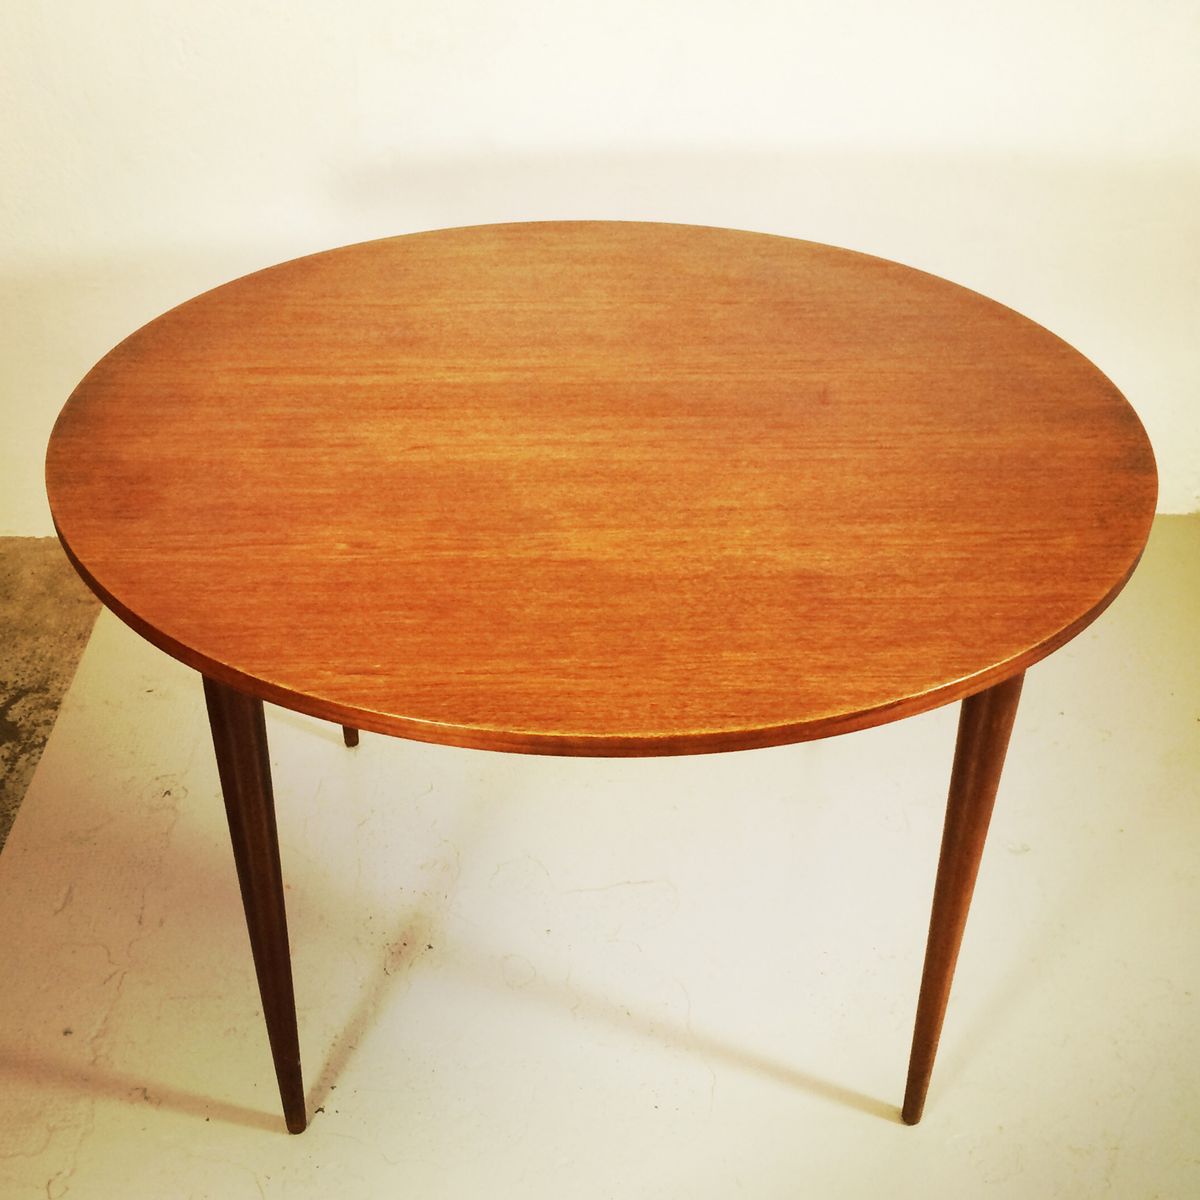 Scandinavian Round Dining Table for sale at Pamono